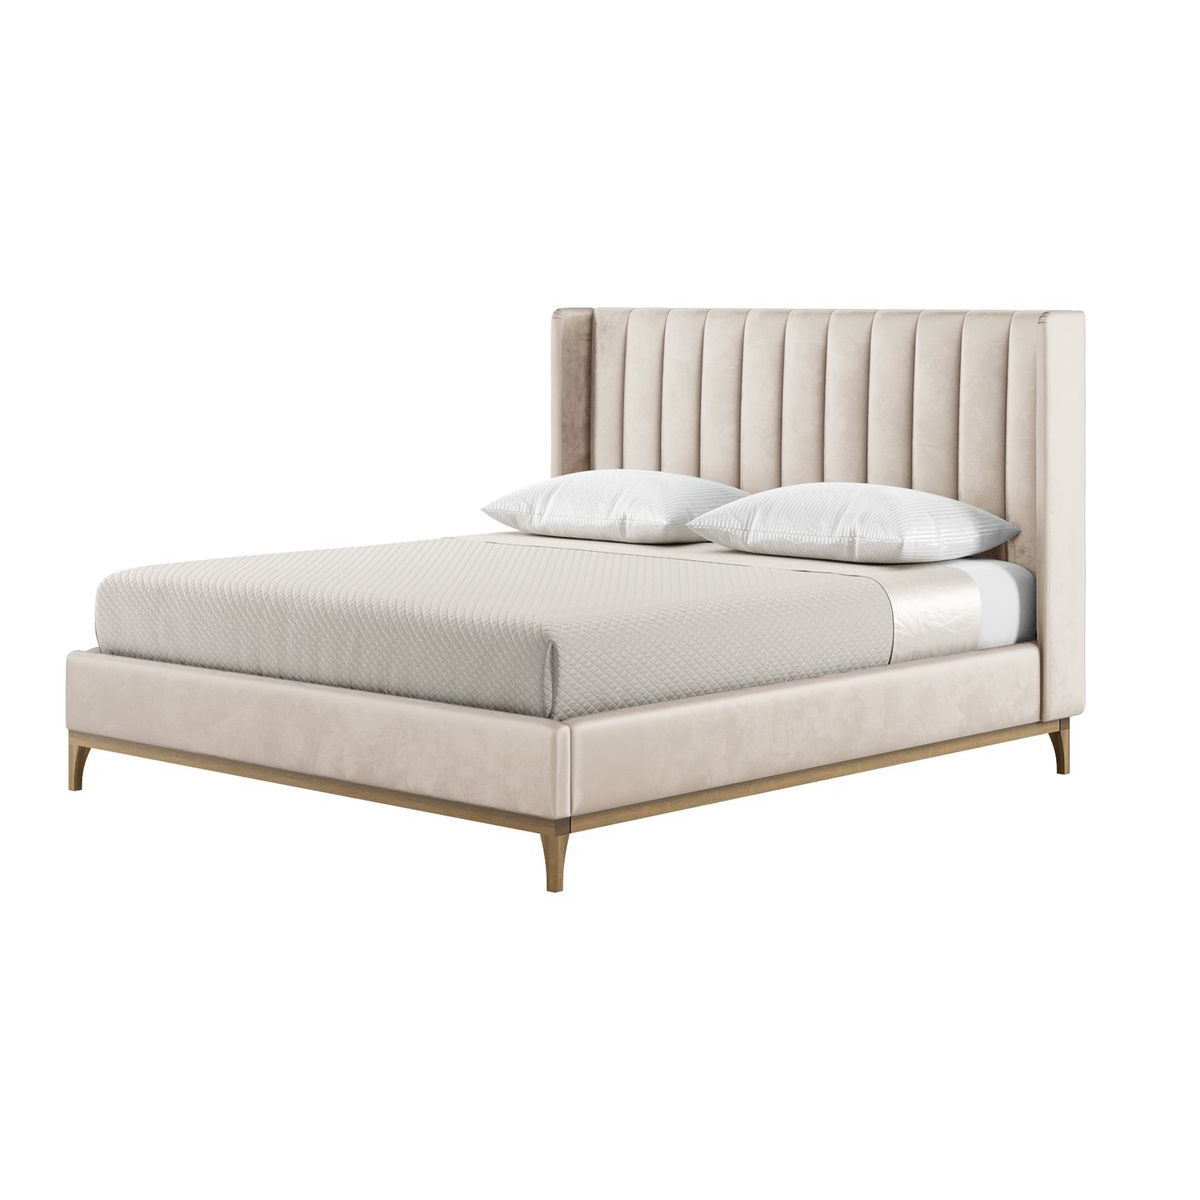 Reese 6ft Super King Size Bed Frame with fluted vertical stitch wing headboard, light beige, Leg colour: wax black - image 1